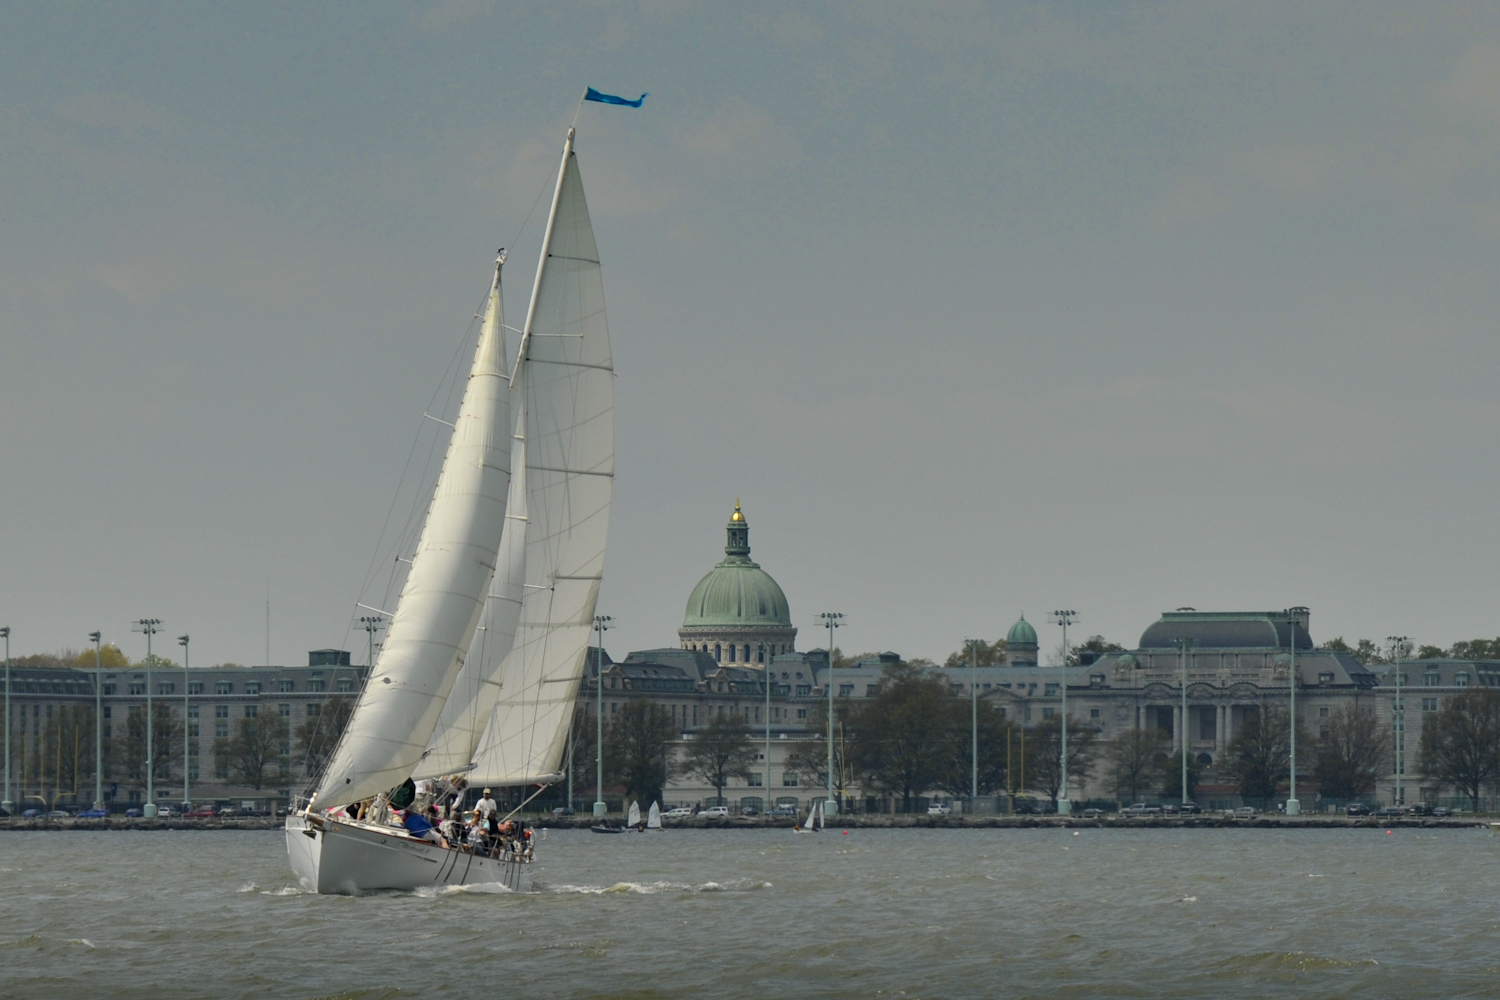 Schooner under sail with USNA Chapel Dome in back ground